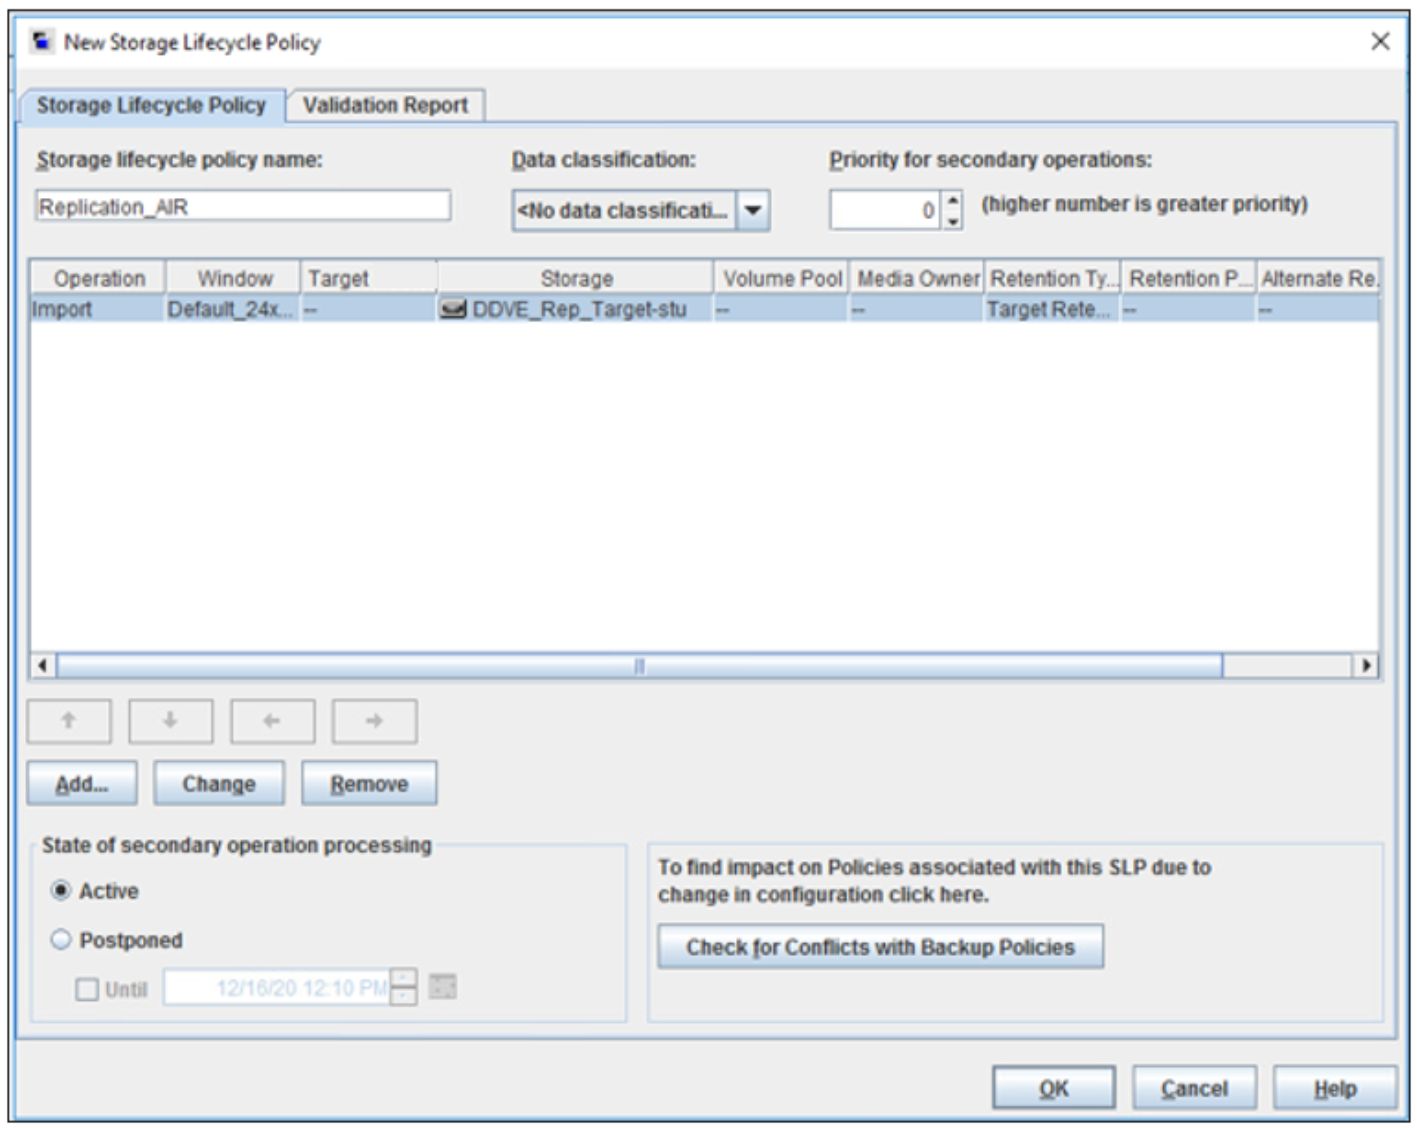 The image shows the Import operation configuration details summary and to save the SLP.